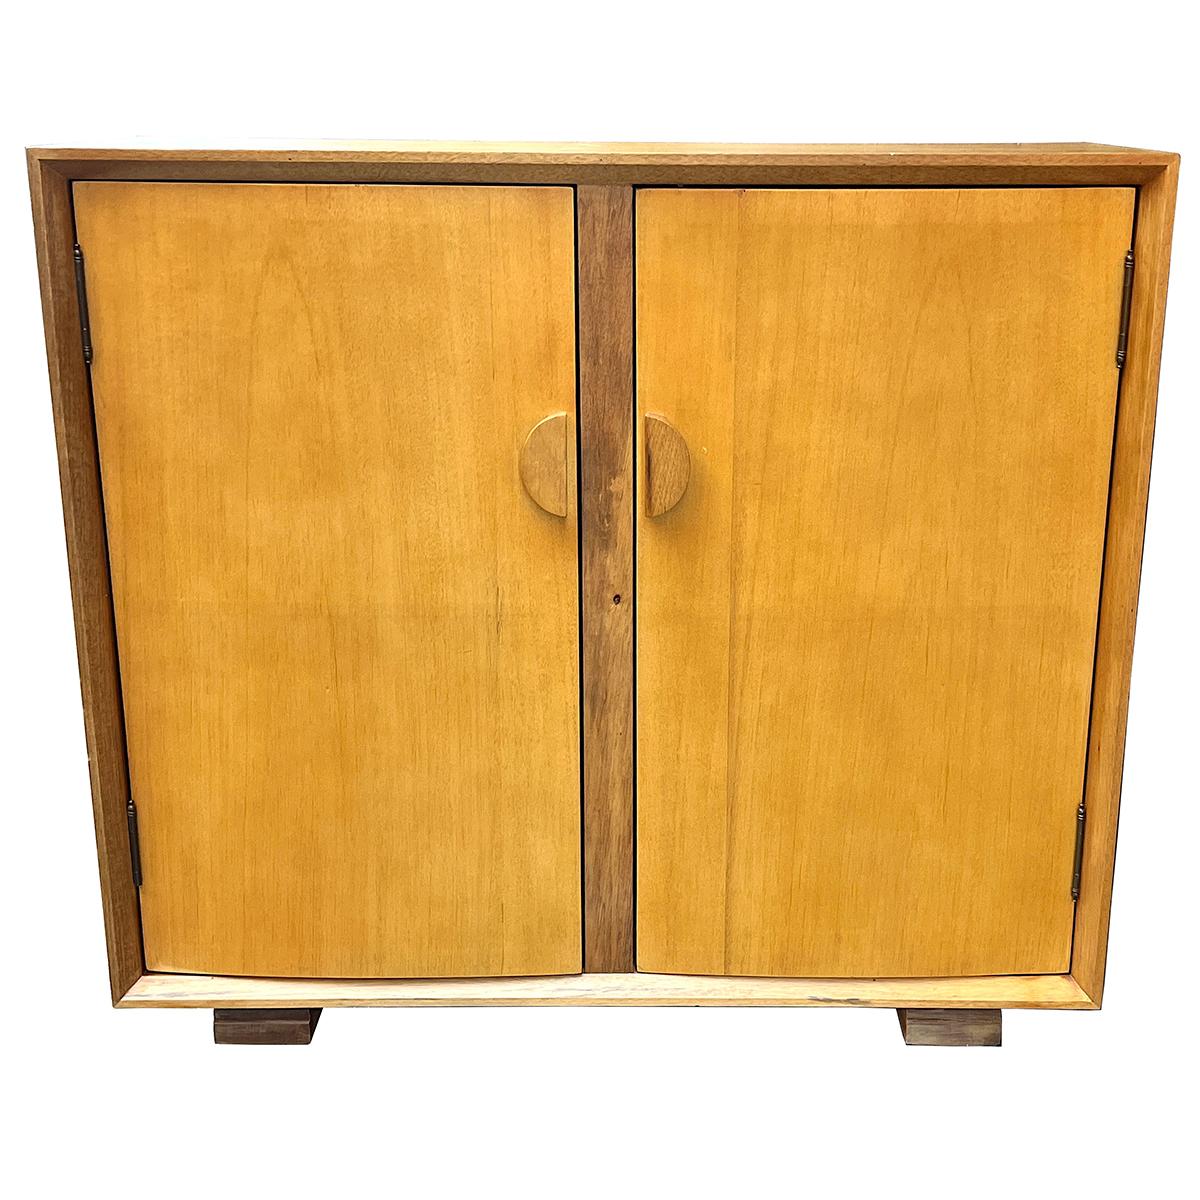 A pair of 1950's French modernist style cabinets with an interior shelf.

Mesurements:
Height: 35.5